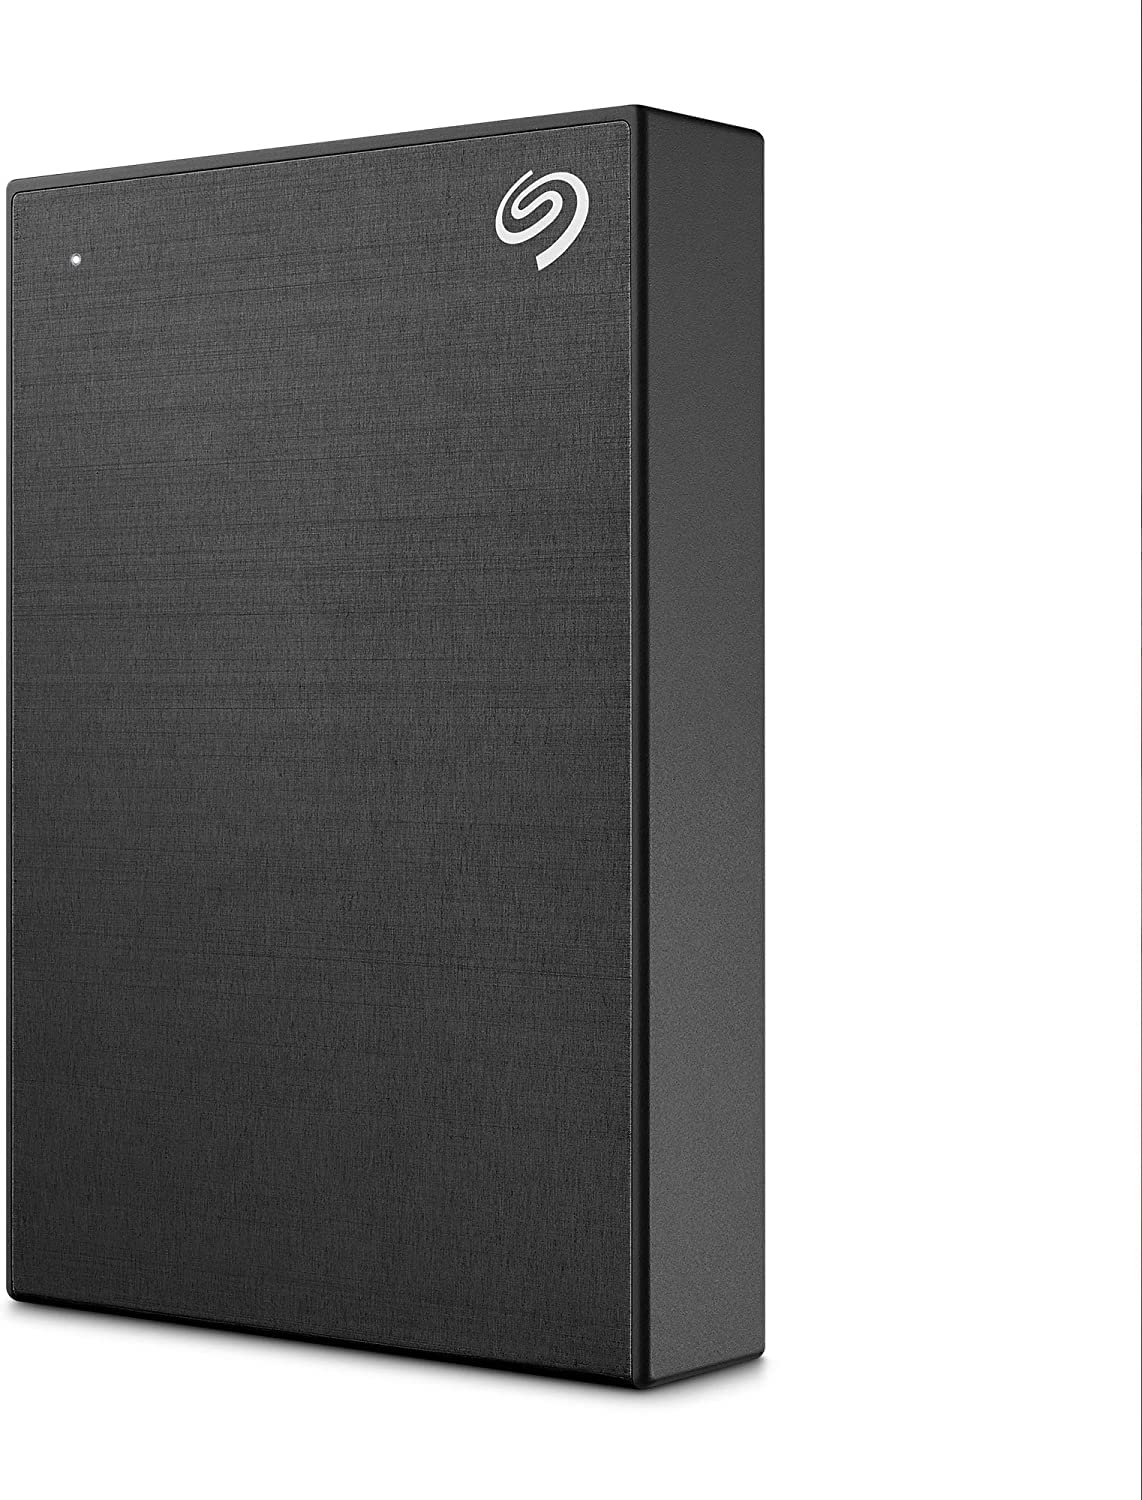 Seagate One Touch HDD with Password 1TB External Hard Drive – Black, for PC Laptop Mac and Chromebook, 6mo Mylio Photos and Dropbox, Rescue Service (STKY1000400)